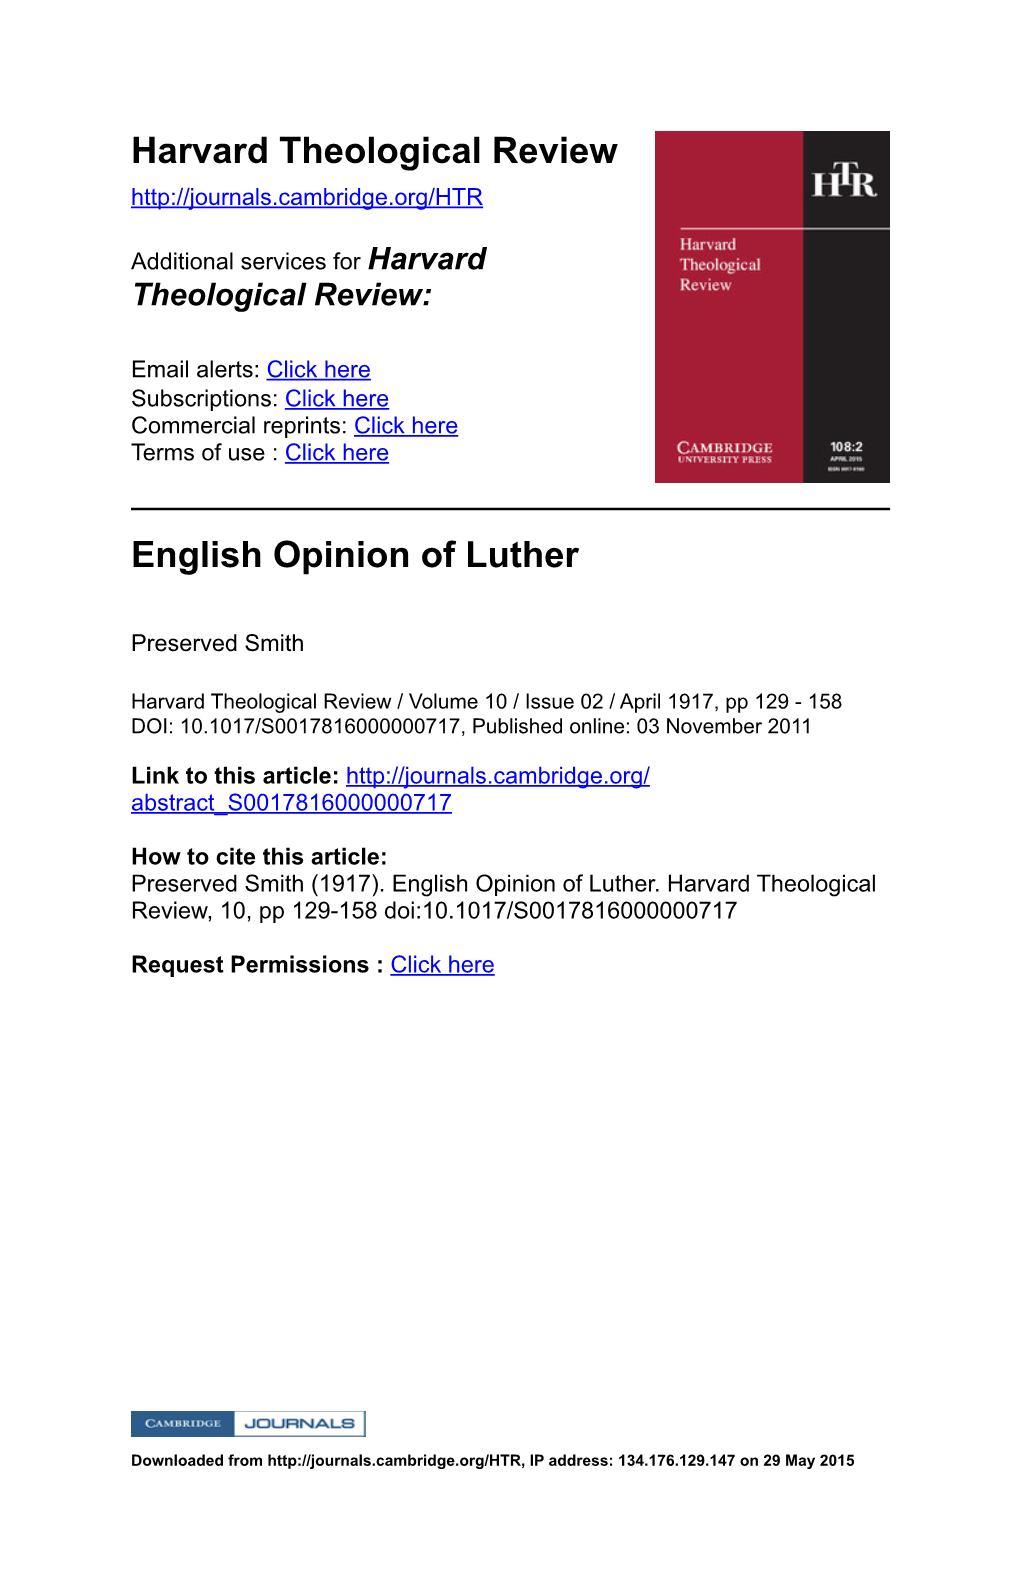 Harvard Theological Review English Opinion of Luther